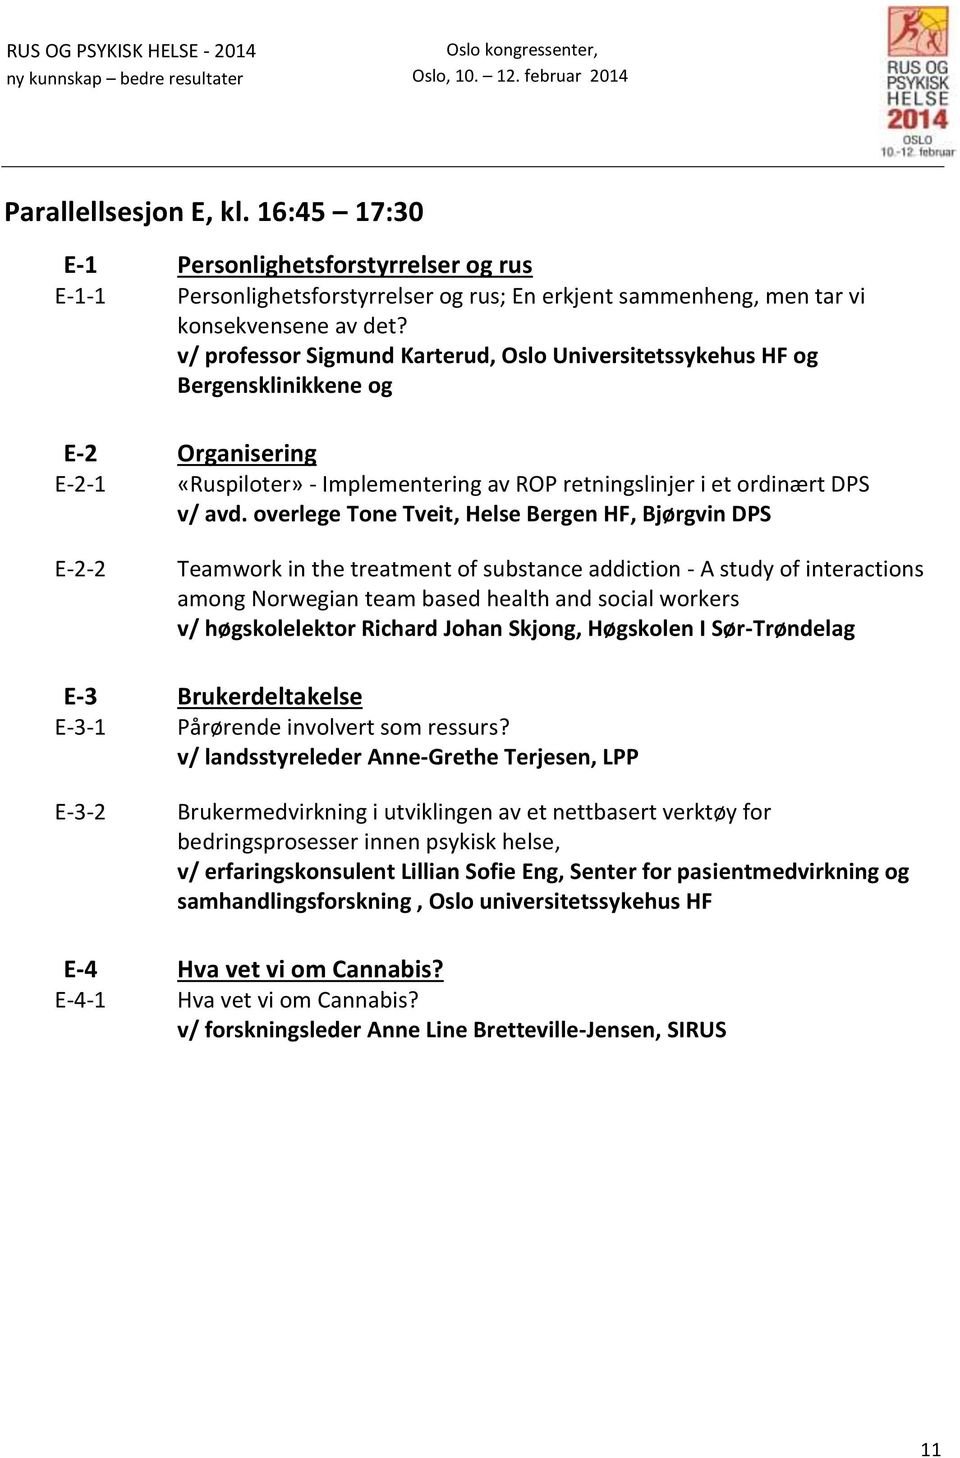 overlege Tone Tveit, Helse Bergen HF, Bjørgvin DPS E-2-2 Teamwork in the treatment of substance addiction - A study of interactions among Norwegian team based health and social workers v/